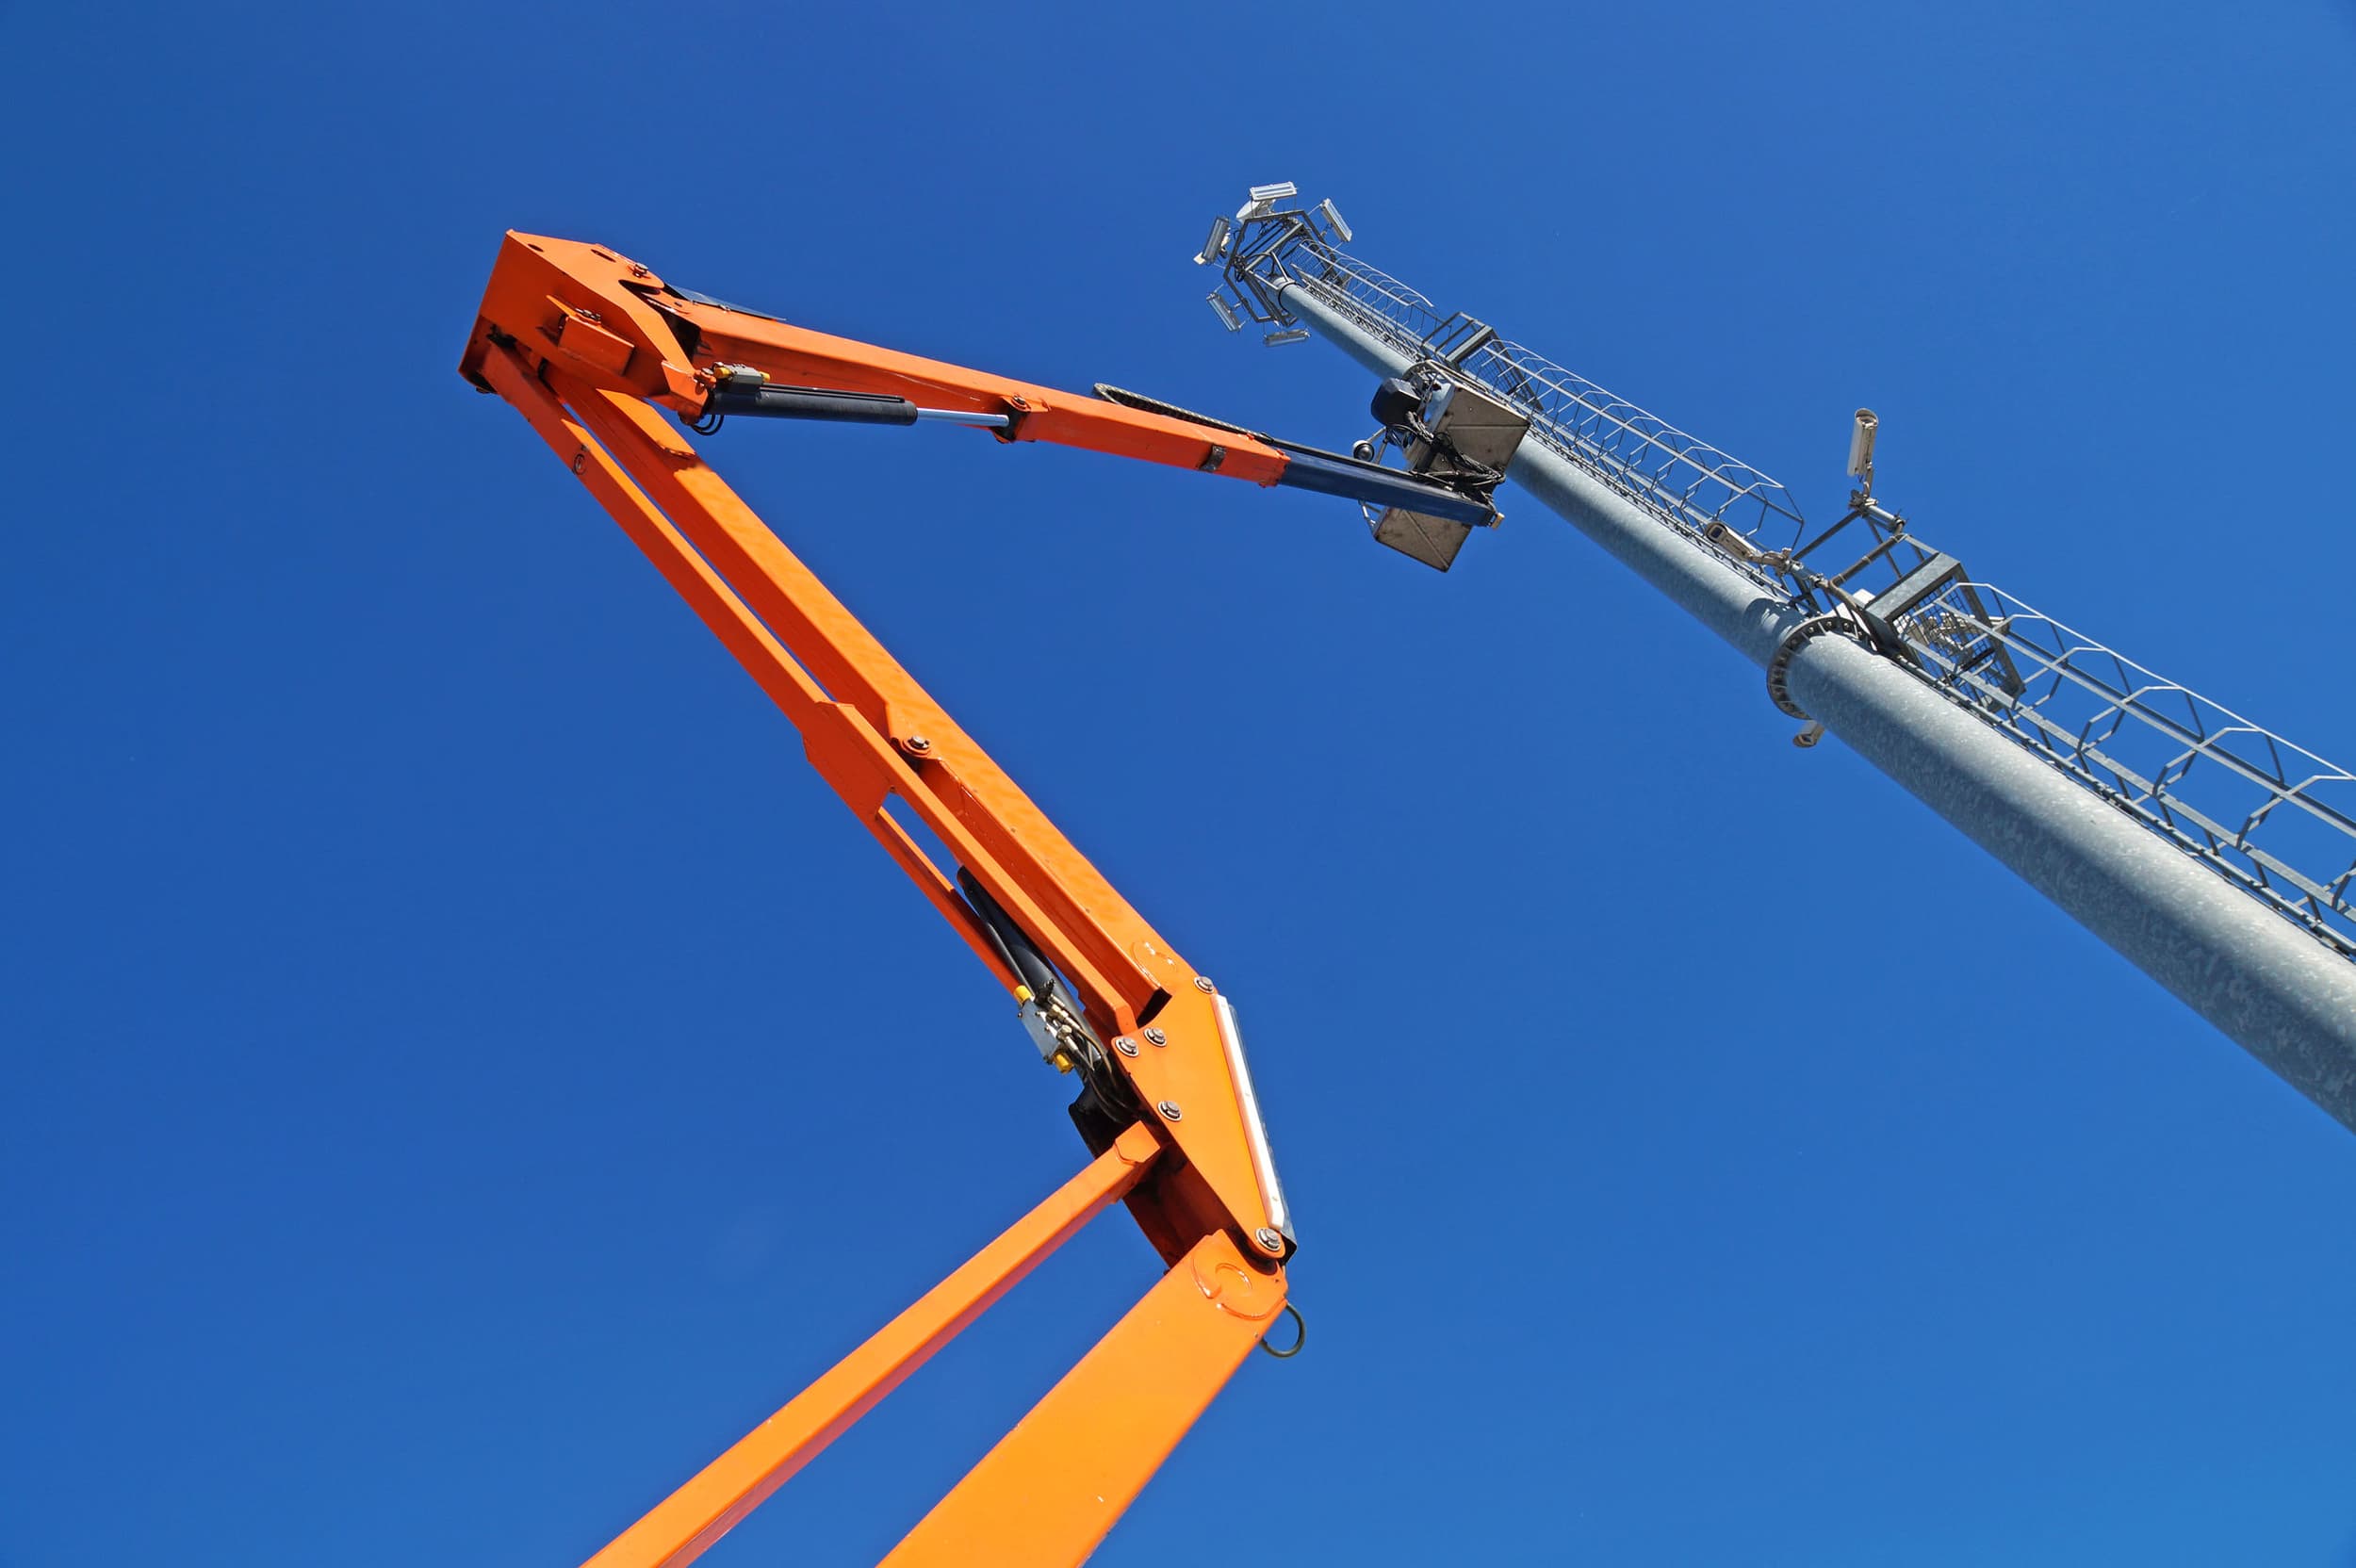 Compliance Training Online Aerial Boom Lifts Safety course